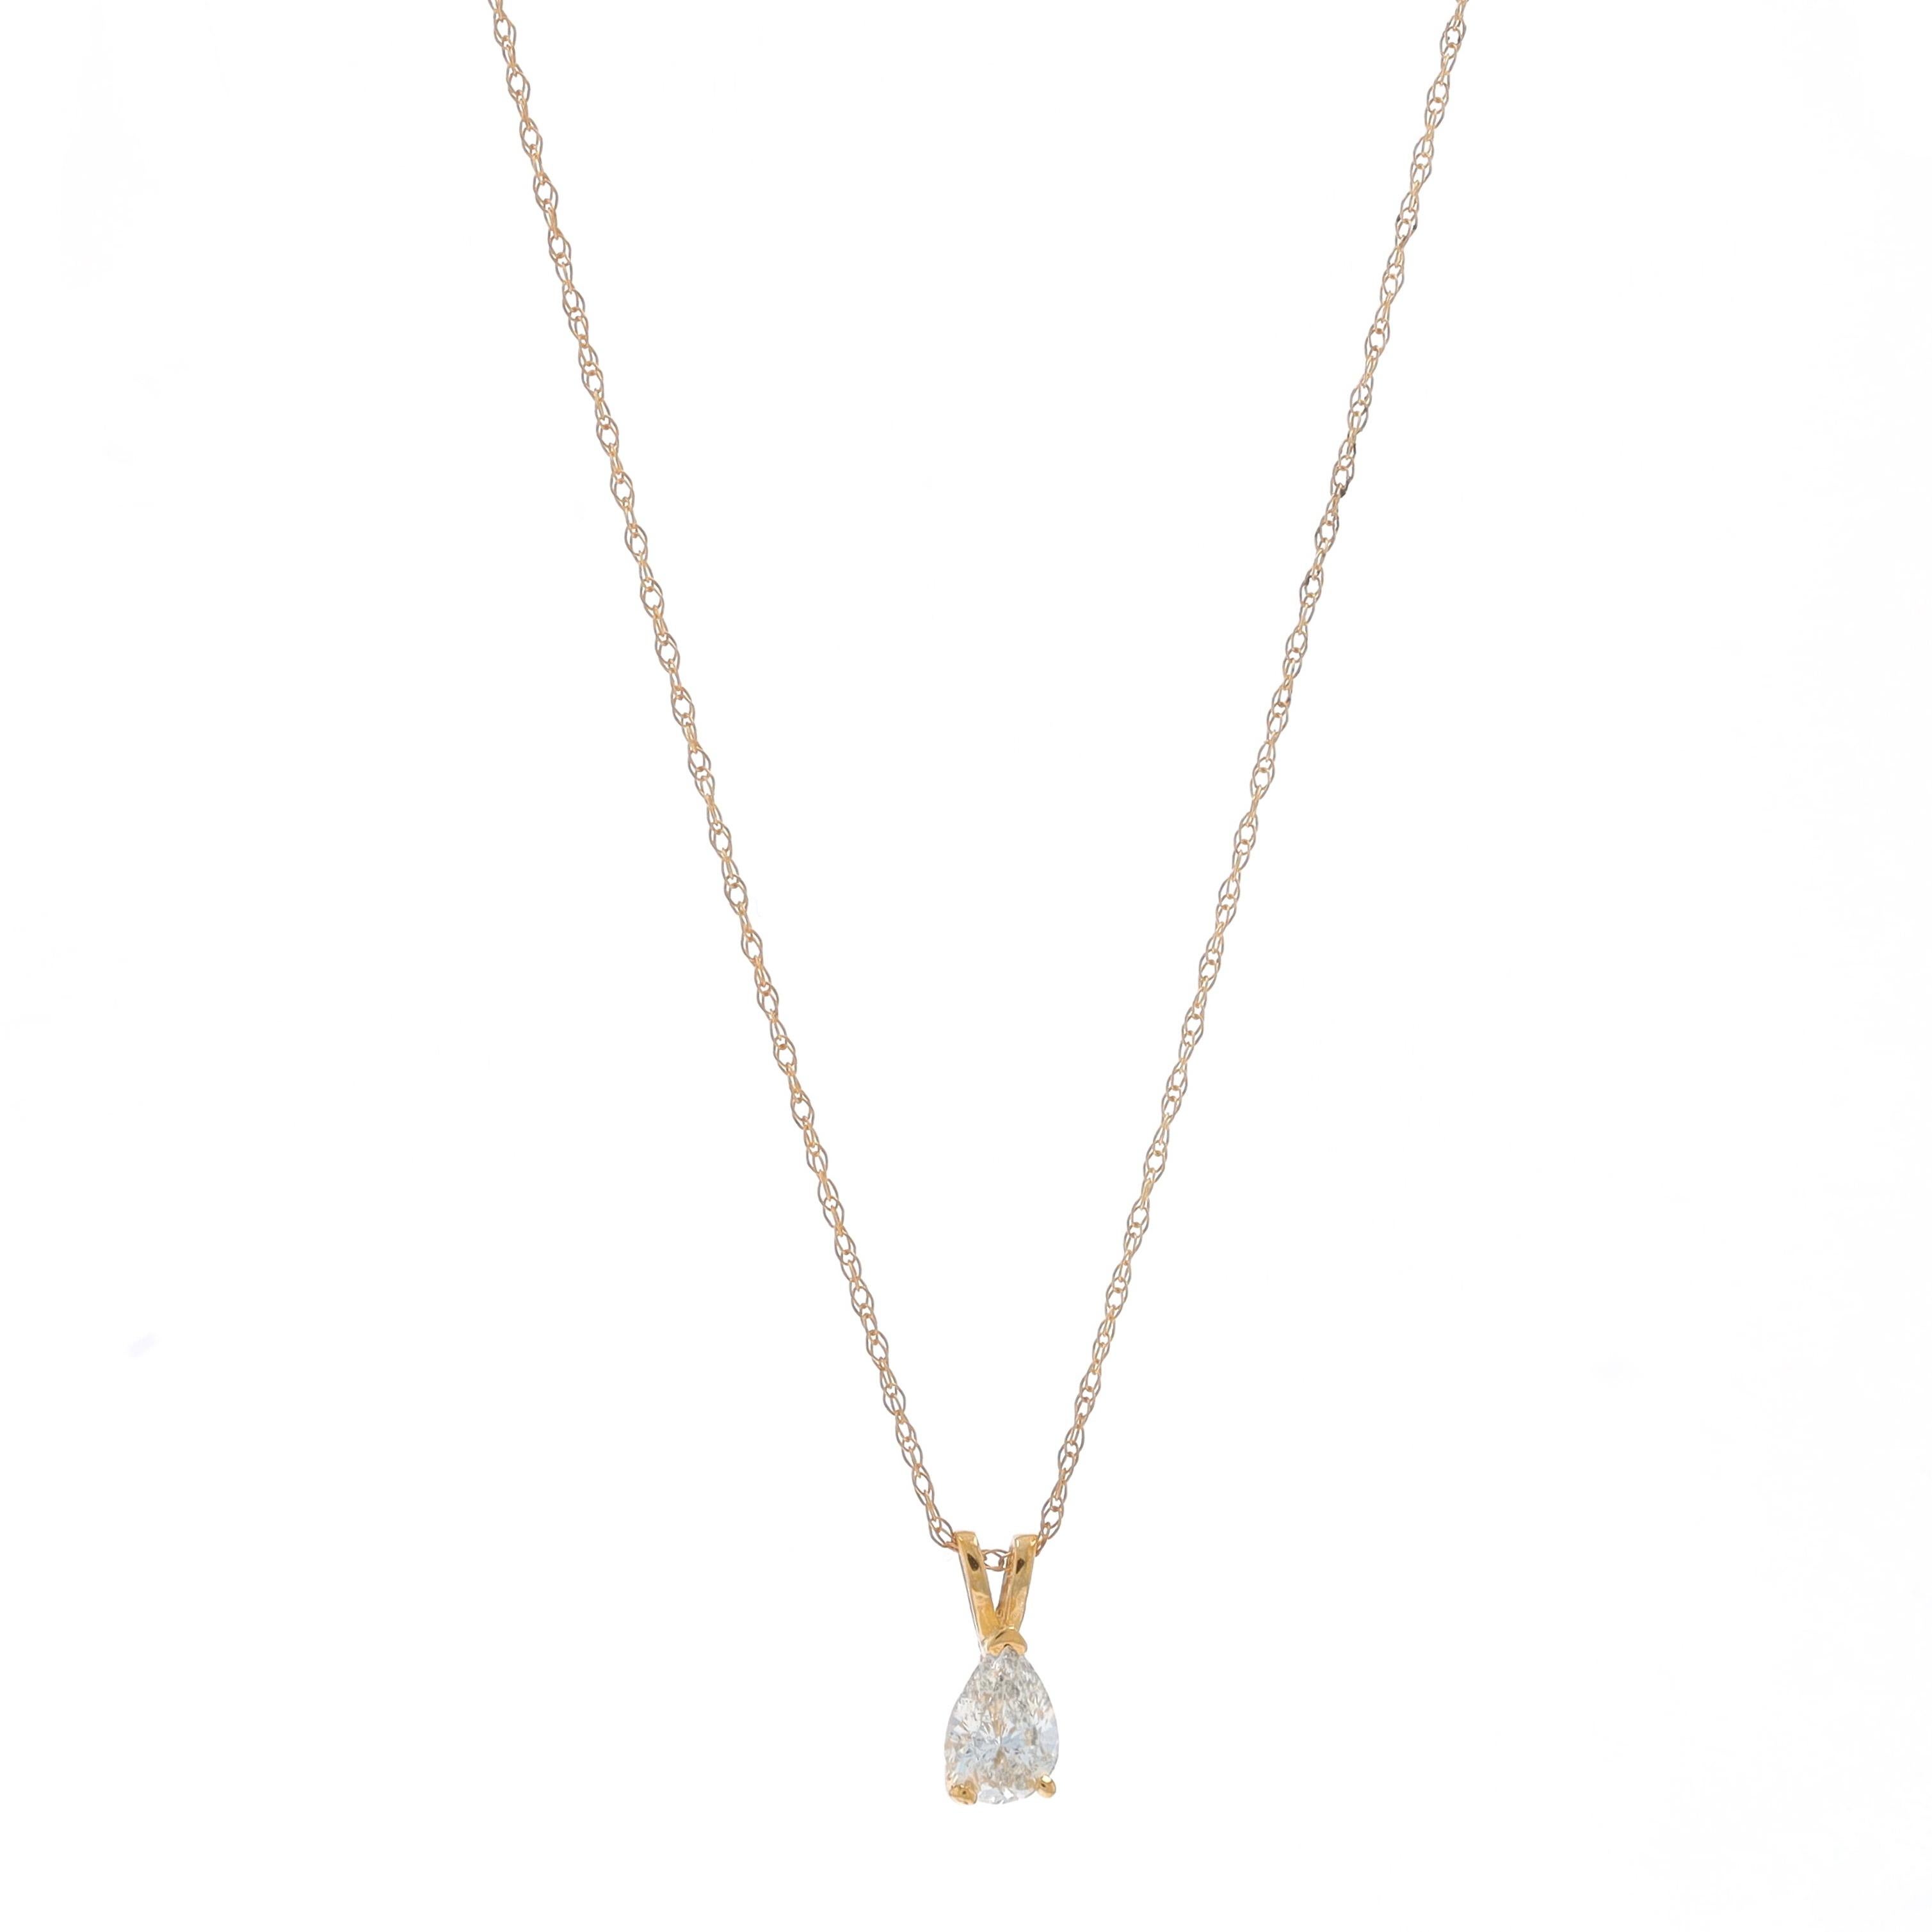 Metal Content: 14k Yellow Gold

Stone Information
Natural Diamond
Carat(s): .60ct
Cut: Pear
Color: K
Clarity: I1 (eyeclean)

Total Carats: .60ct

Style: Solitaire
Chain Style: Prince of Wales
Necklace Style: Chain
Fastening Type: Spring Ring